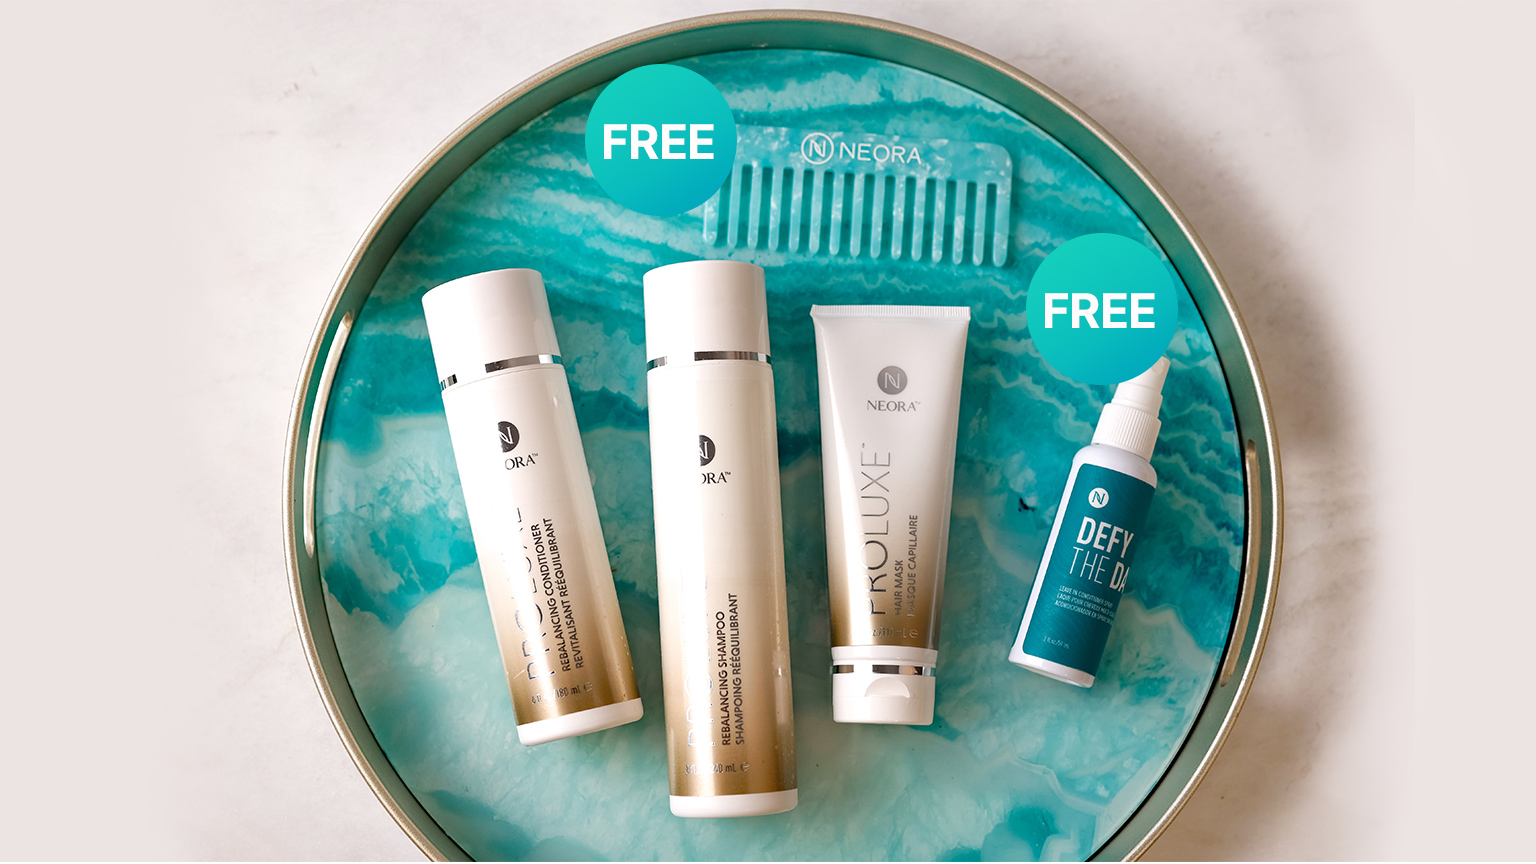 Neora’s Summer Hair Essentials Set, which includes ProLuxe Rebalancing Shampoo and Conditioner, Proluxe Hair Mask and a FREE Ultimate Detangling Comb and Defy the Day Leave-in Conditioner Spray laying on a turquoise plate